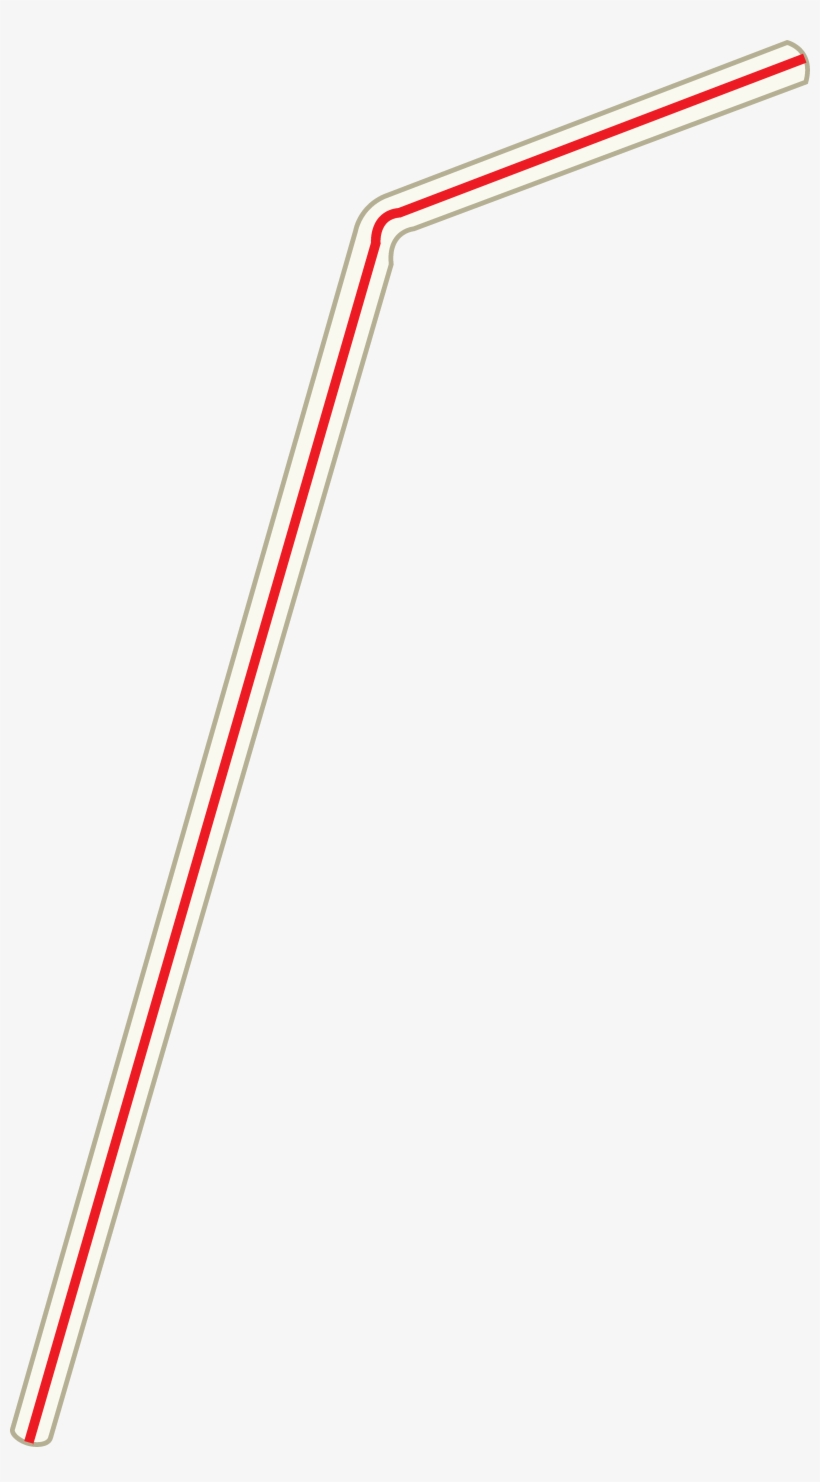 Clip Arts Related To - Free Drinking Straws Png, transparent png #570021